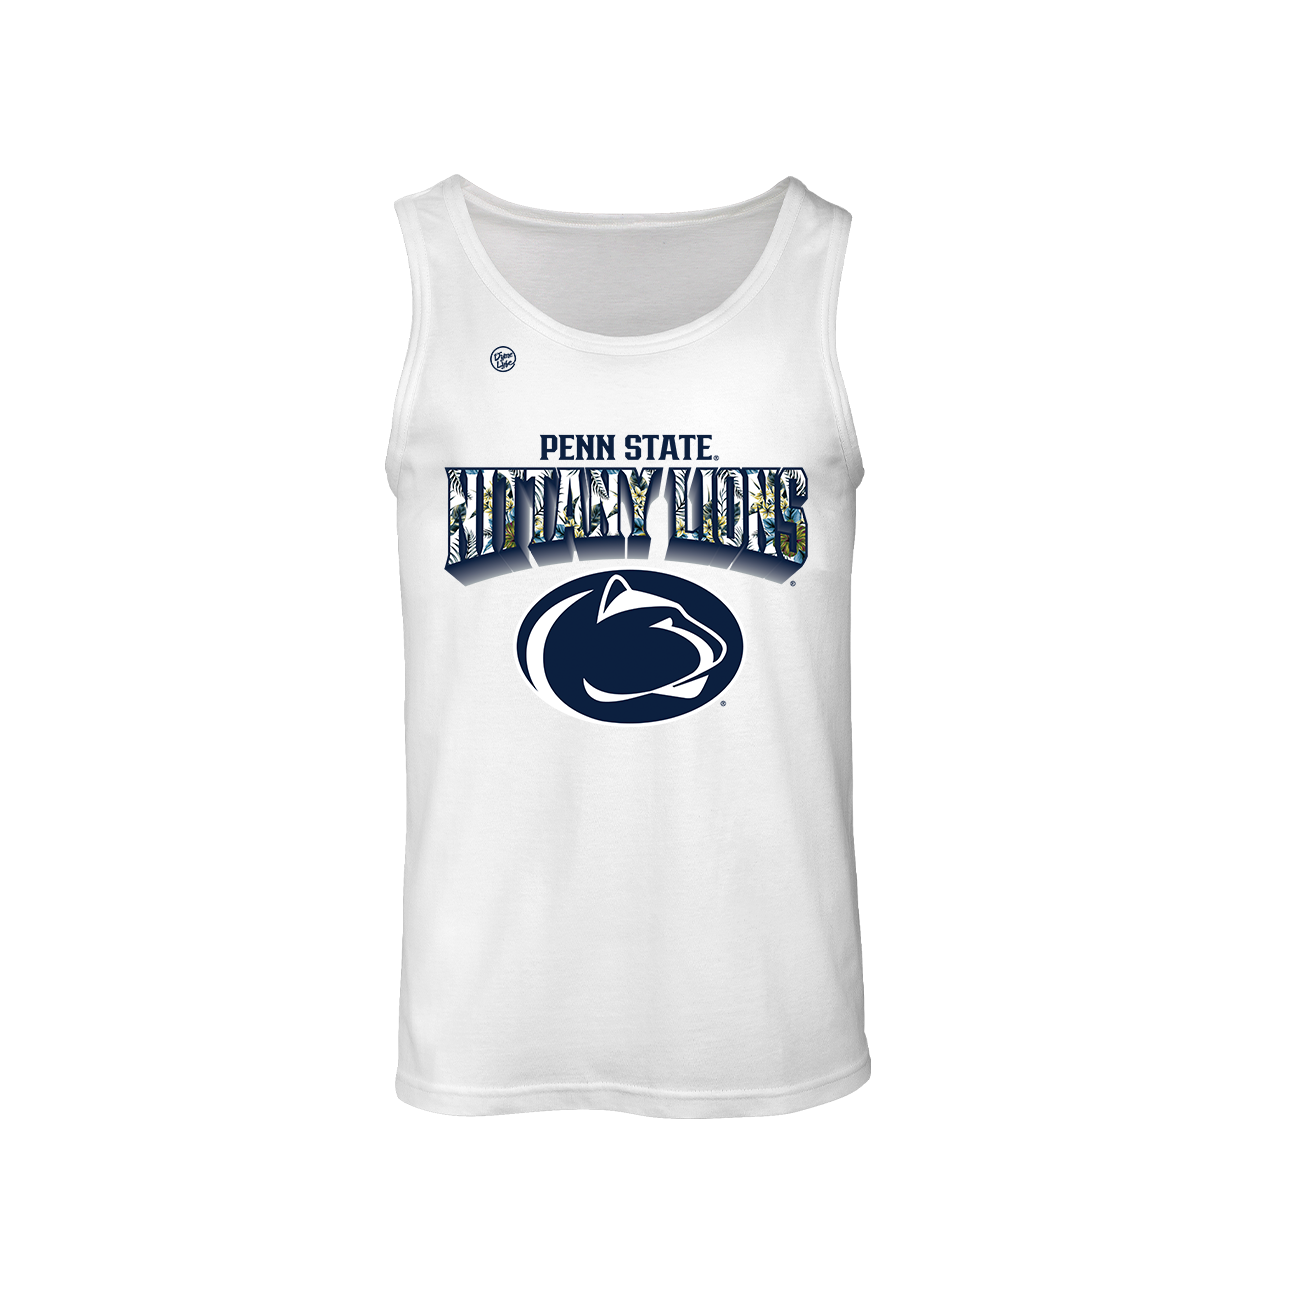 Penn State Nittany Lions Men’s Floral Team Tank